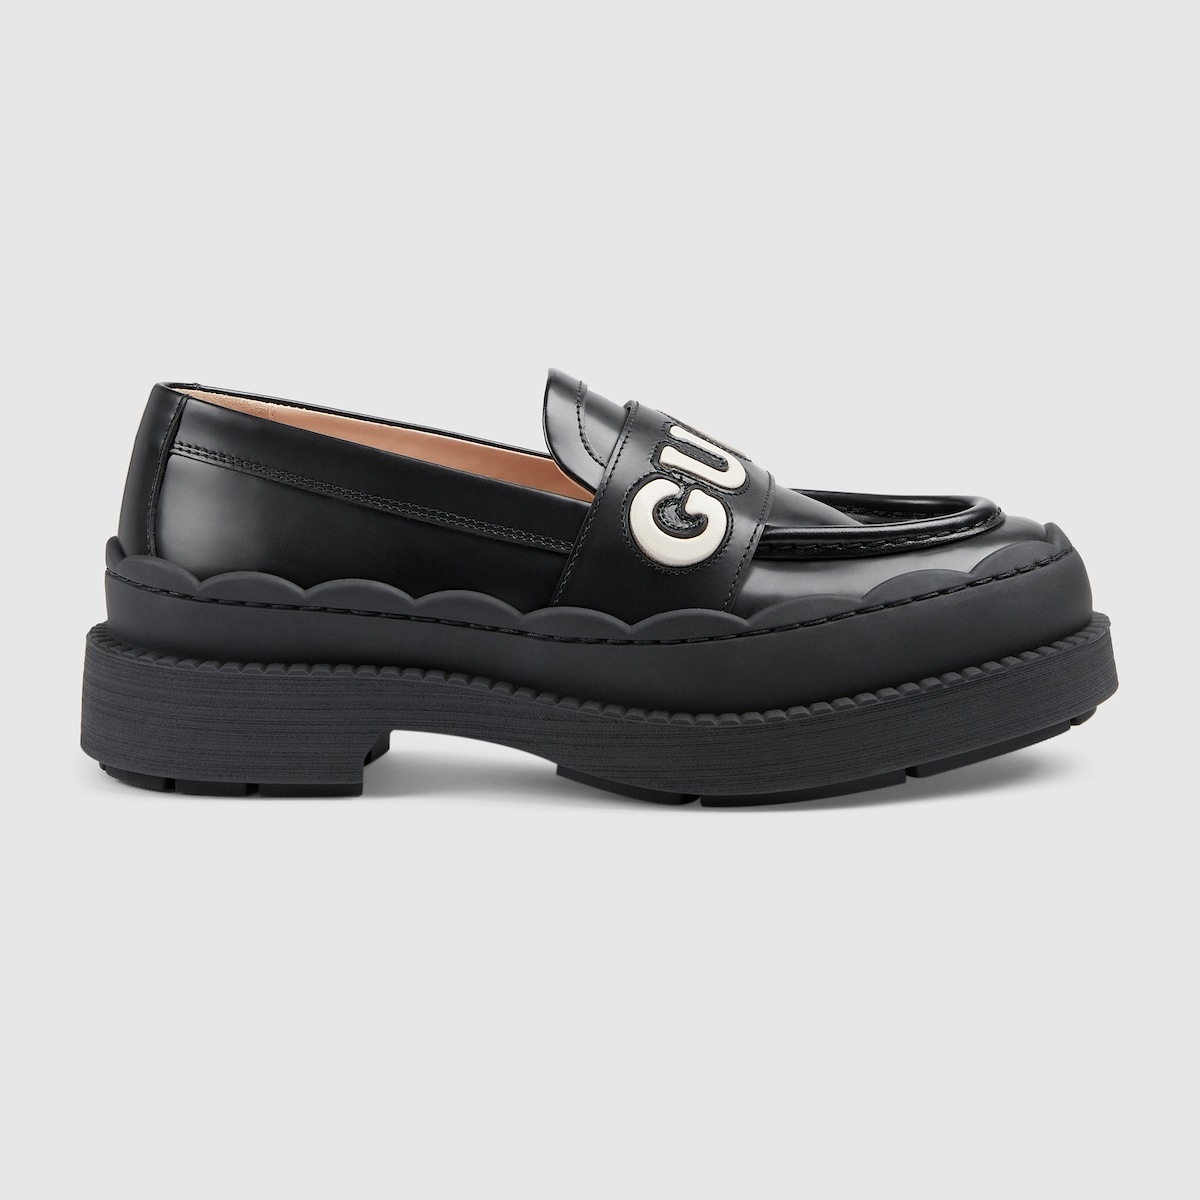 Women's Gucci loafer - 1